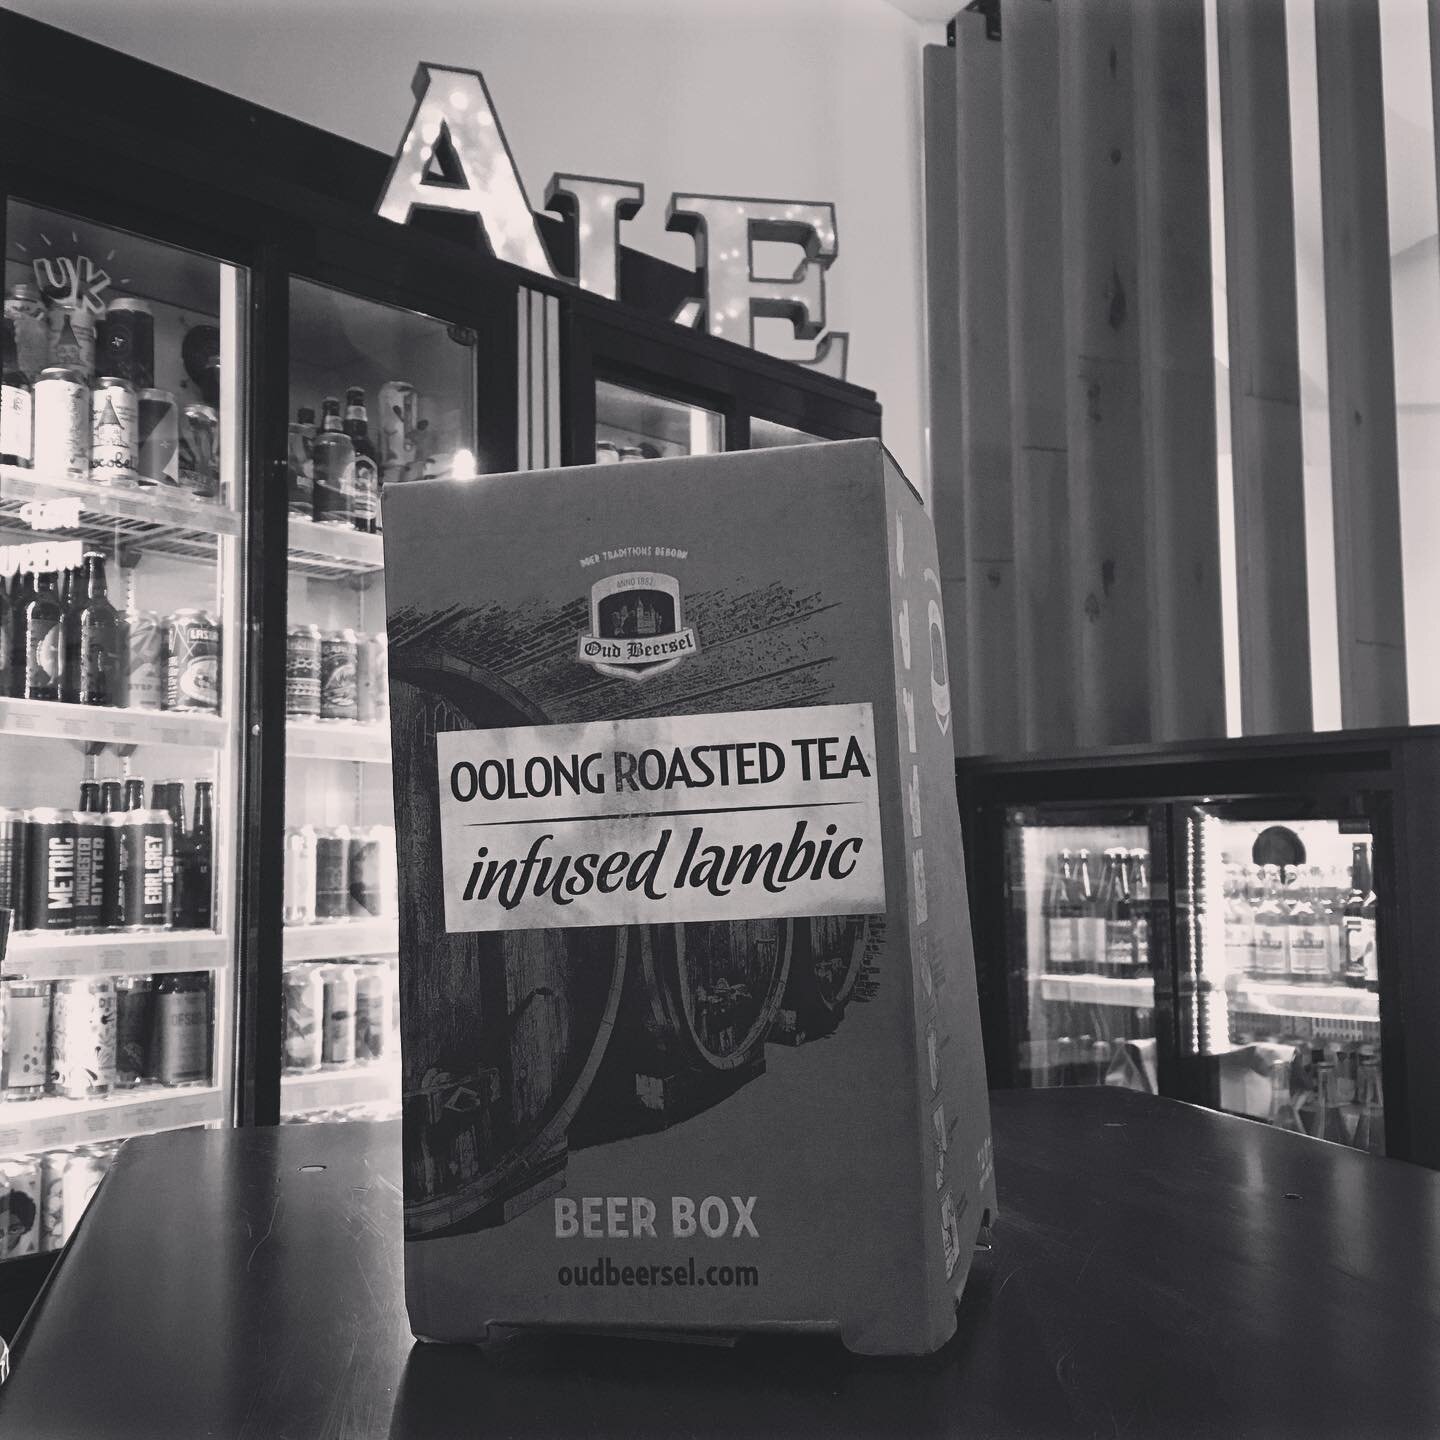 These @oudbeersel 3L beer boxes were so popular last time we got some more.... Here&rsquo;s Oolong roasted tea with its balanced and lightly herbal notes ☕️🍺 #lambic #oudbeersel